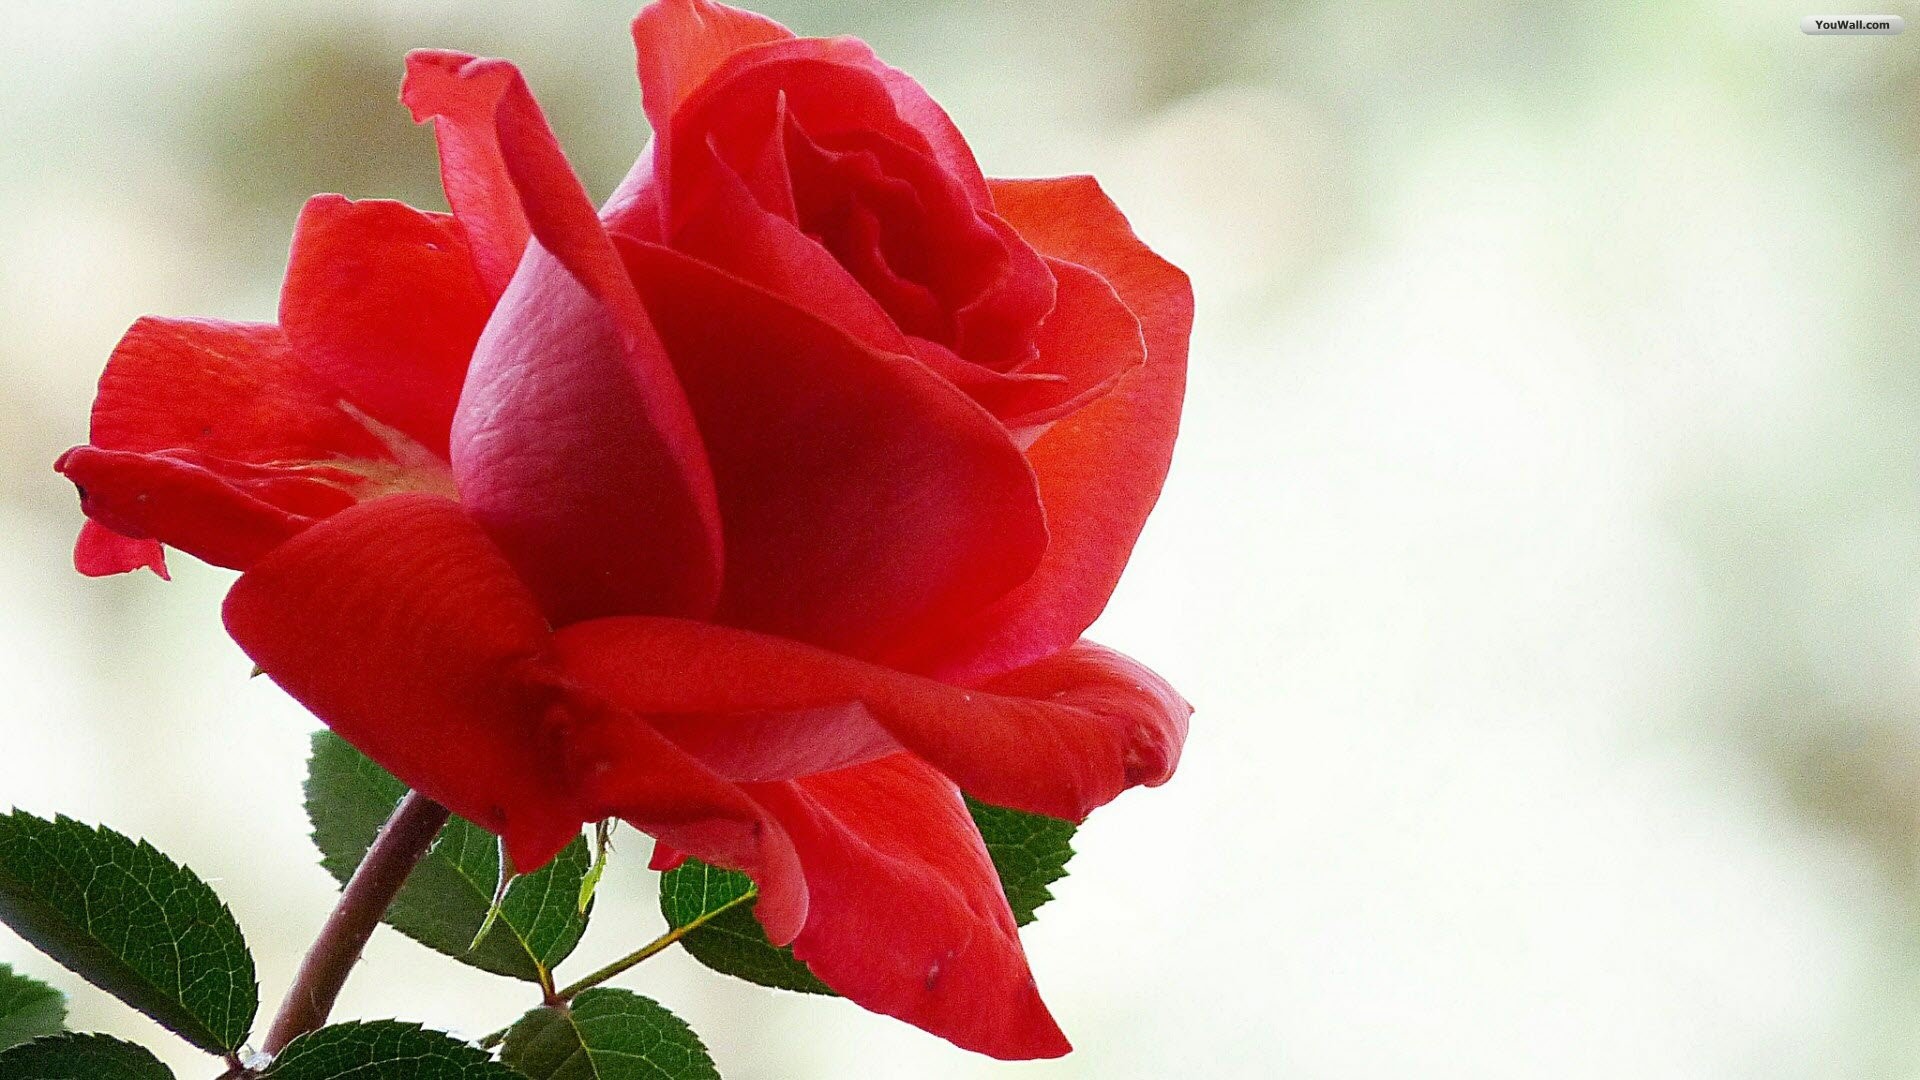 1920x1080 ... Red Roses Wallpaper Backgrounds rose backgrounds download free .